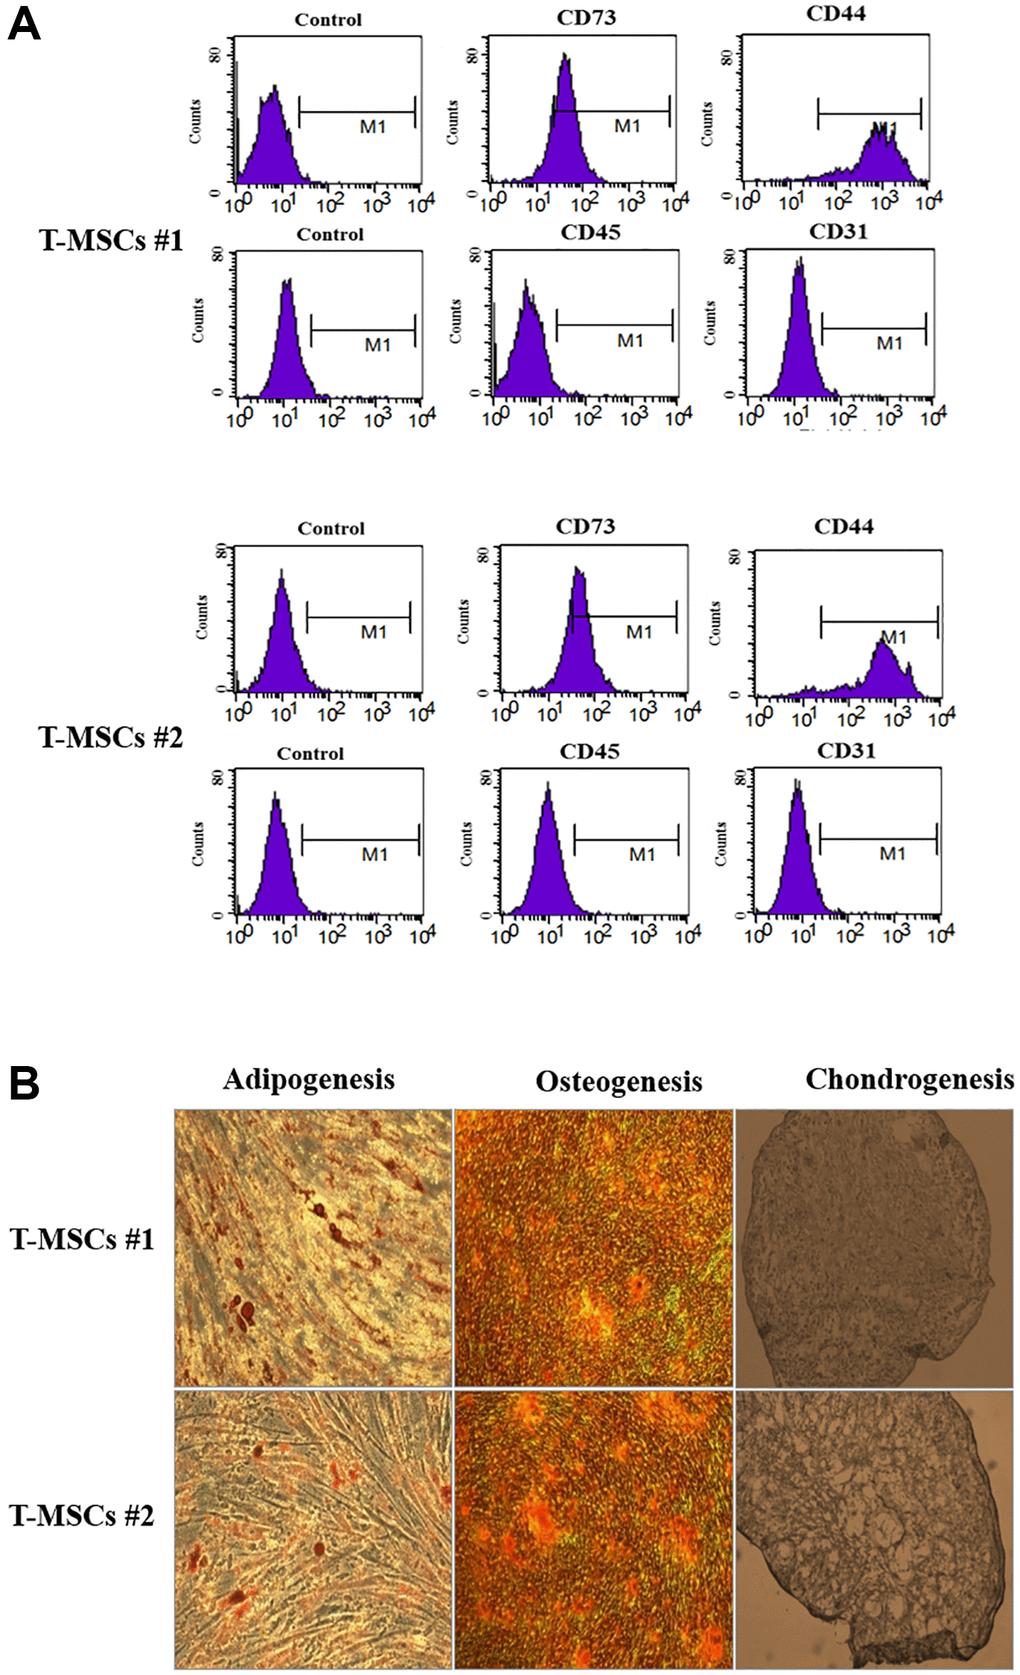 Characterization of human tonsil mesenchymal stem cells (T-MSCs). Surface marker profiling determined by fluorescence-activated cell sorting in T-MSCs. The cells were positive for CD73 and CD44 and negative for CD45 and CD31; the upper panel is T-MSCs #1 and the lower panel is T-MSCs #2 (A). The adipogenesis, chondrogenesis, and osteogenesis of T-MSCs were examined by oil red staining, alizarin red staining, and Alcian blue staining, respectively; the upper panel is T-MSCs #1 and the lower panel is T-MSCs #2 (B).